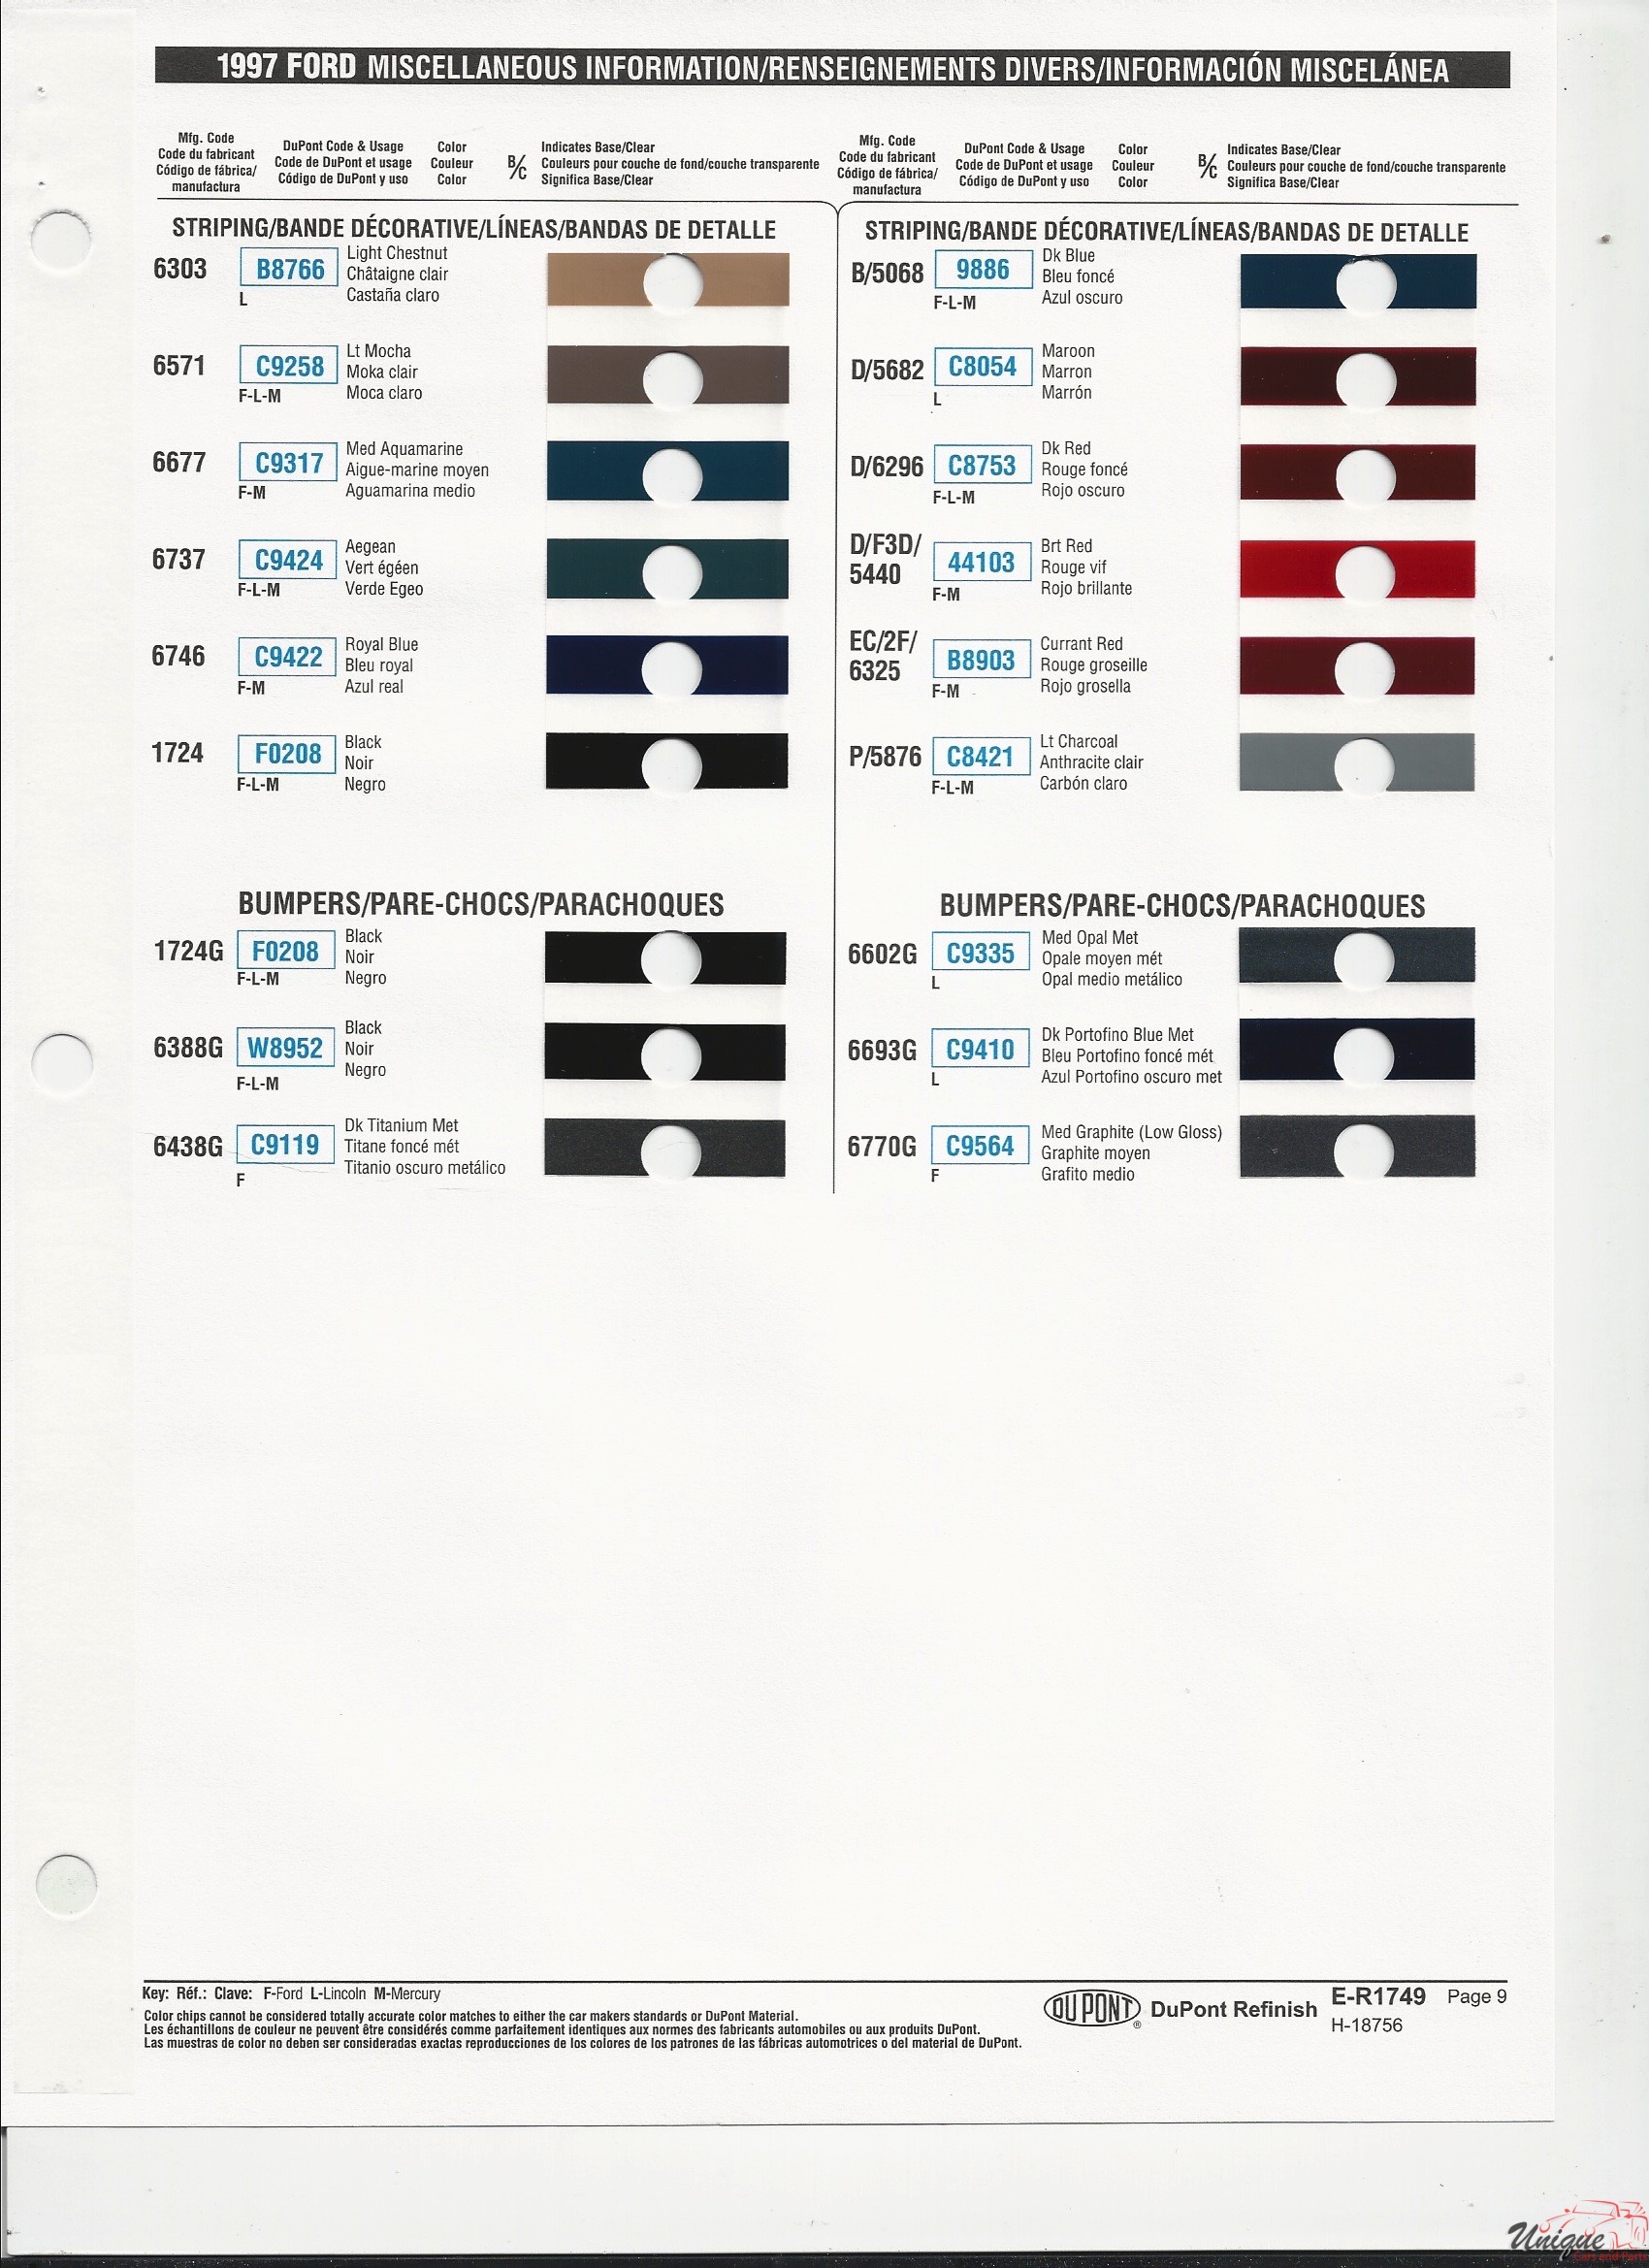 1997 Ford-8 Paint Charts